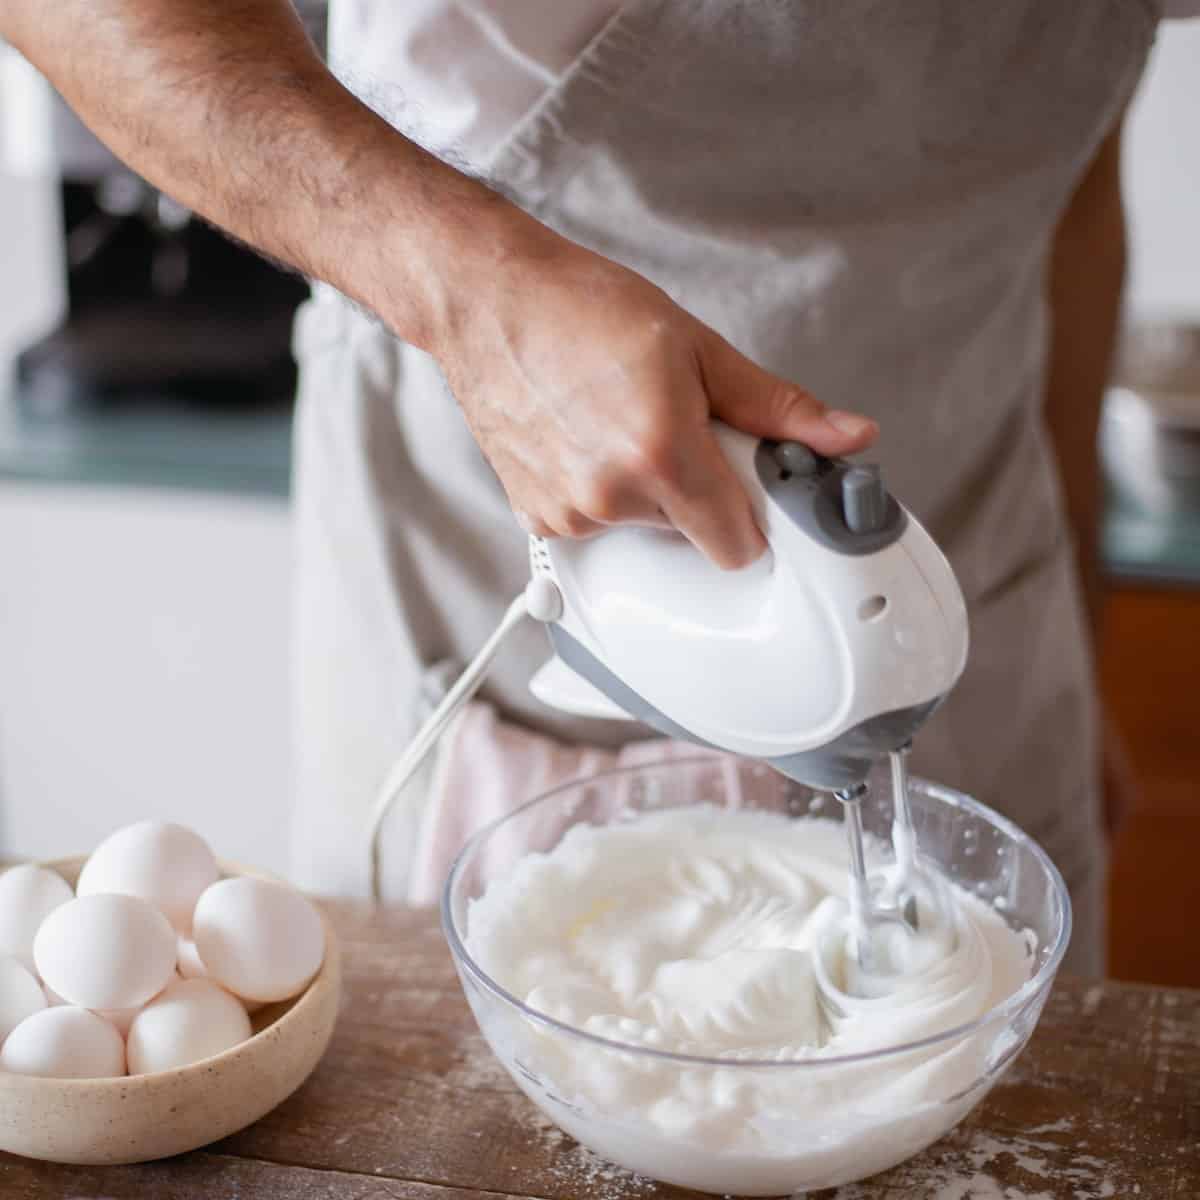 A baker using a hand mixer on a bowl of white cream with other ingredients on the table